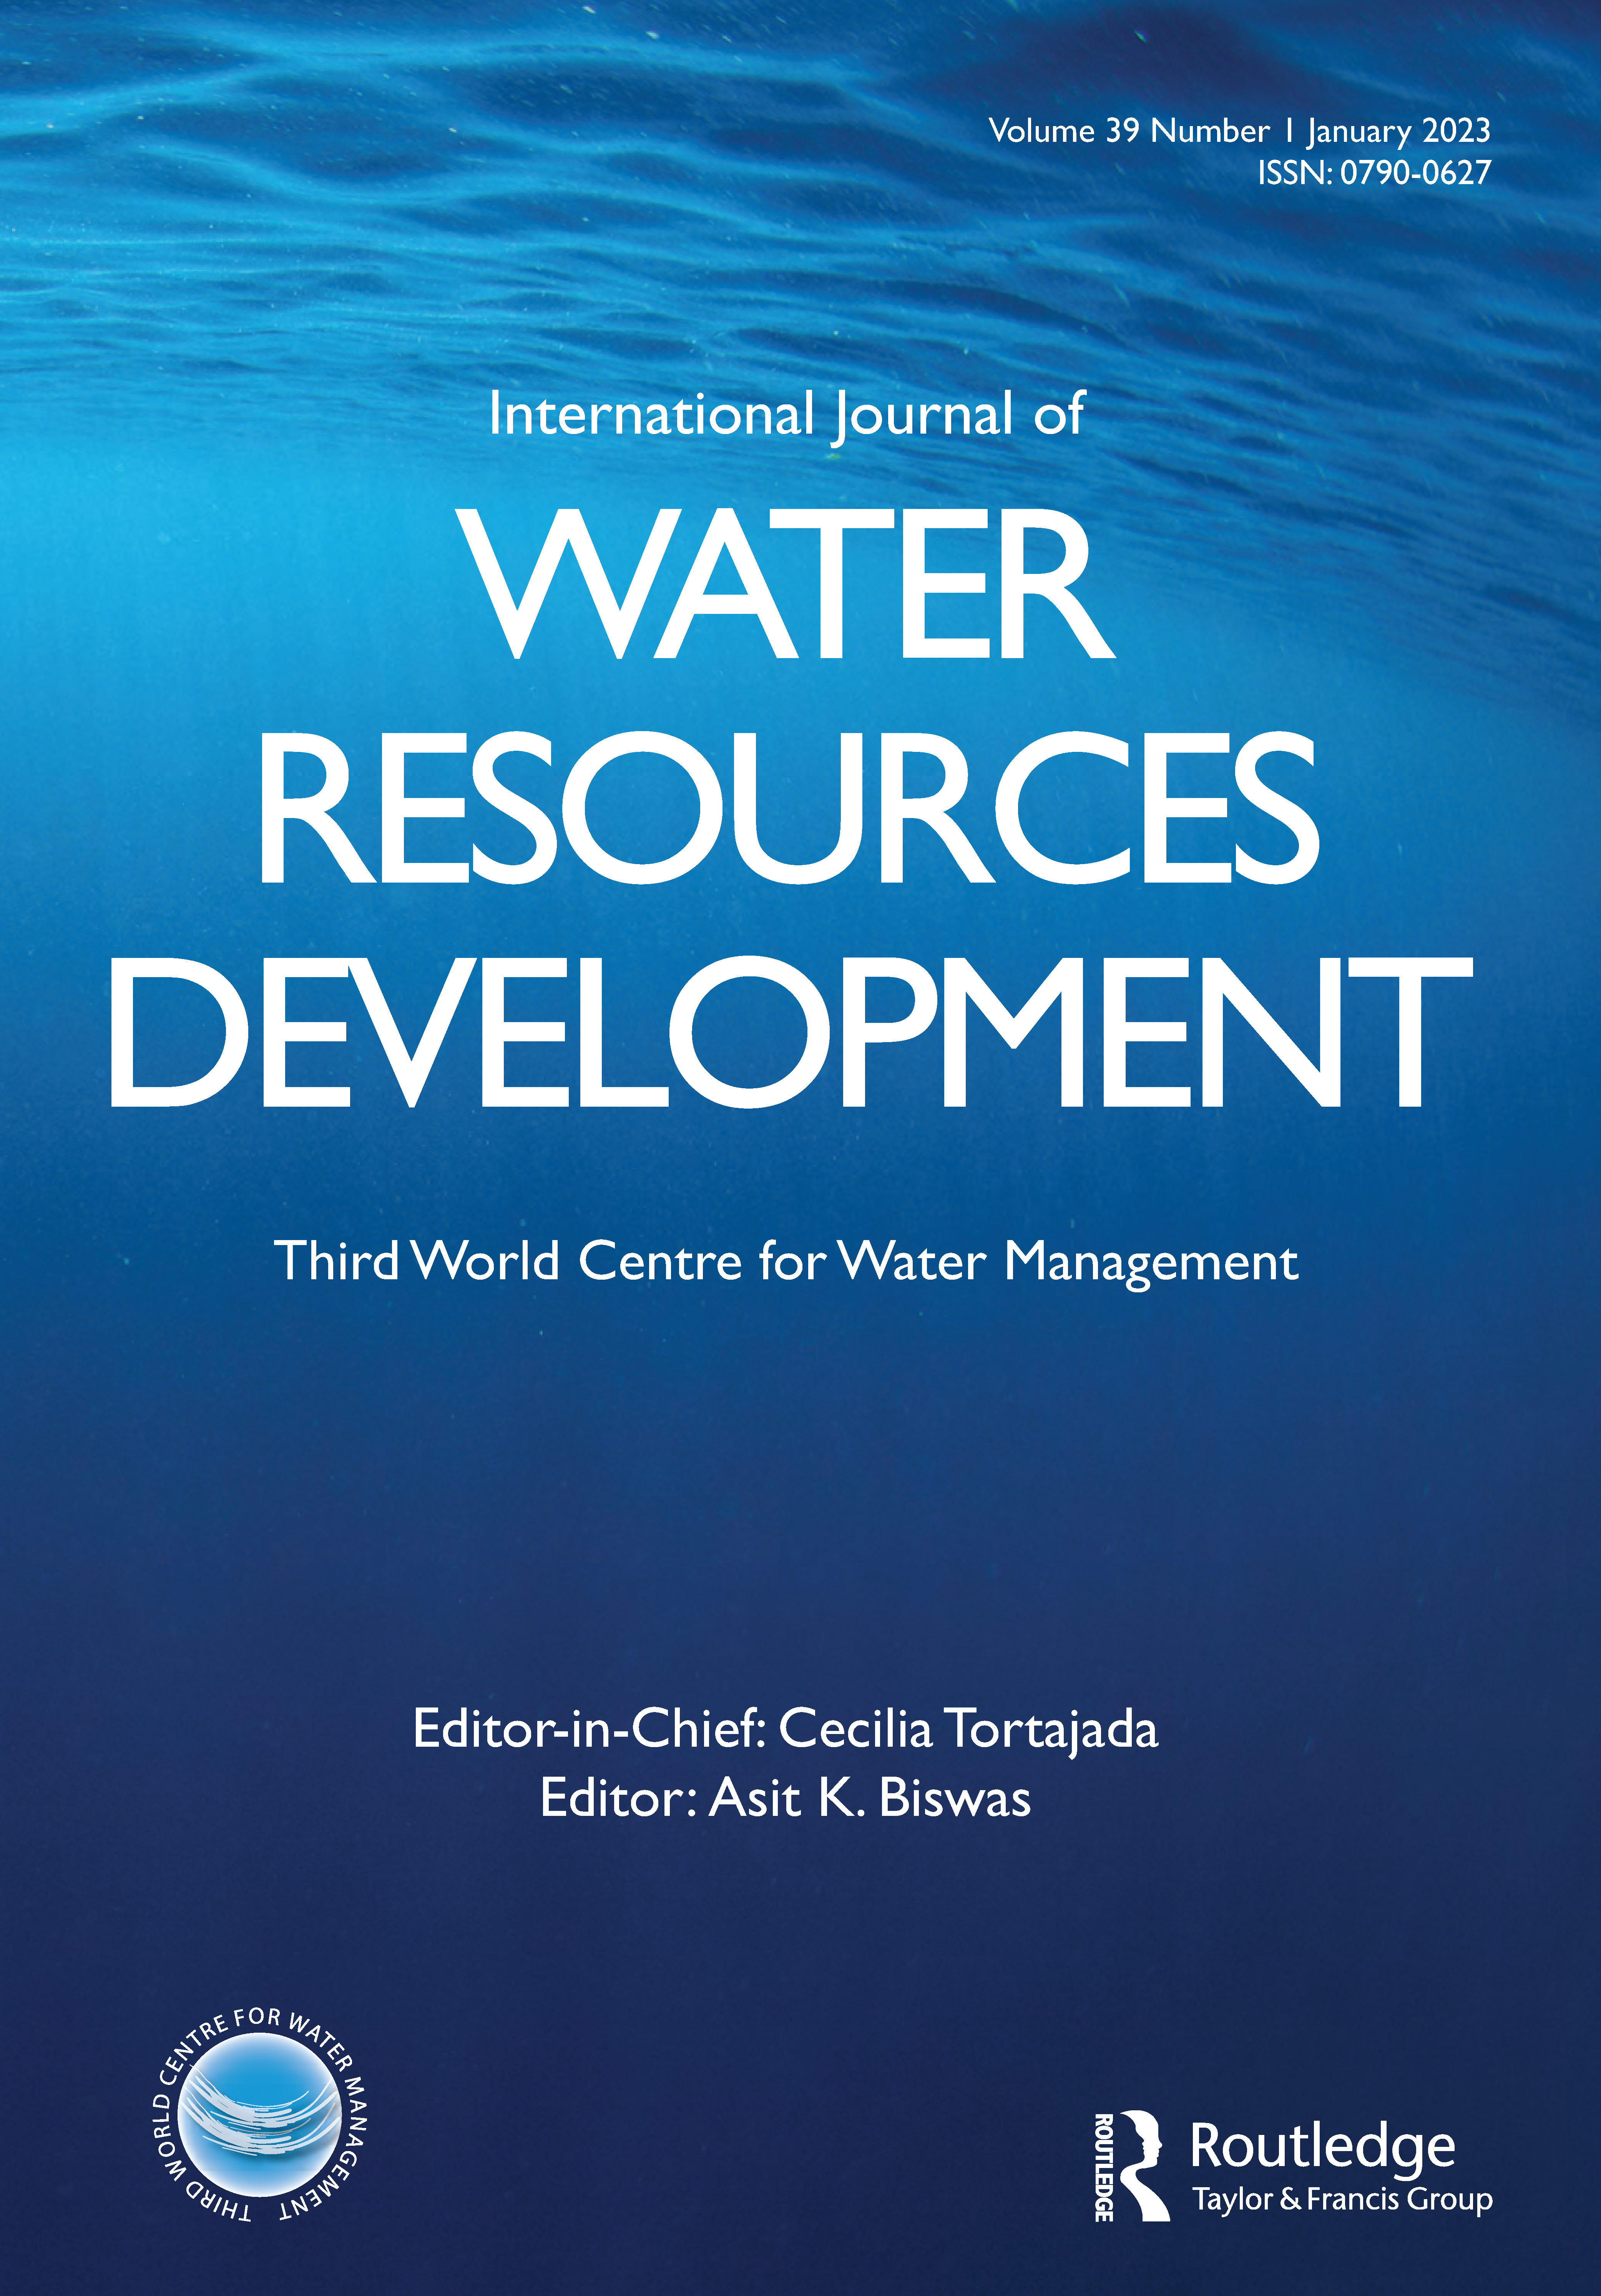 Now available January Issue of the International Journal of Water Resources Development, Volume 39, Issue 1 (2023) https://www.tandfonline.com/t...